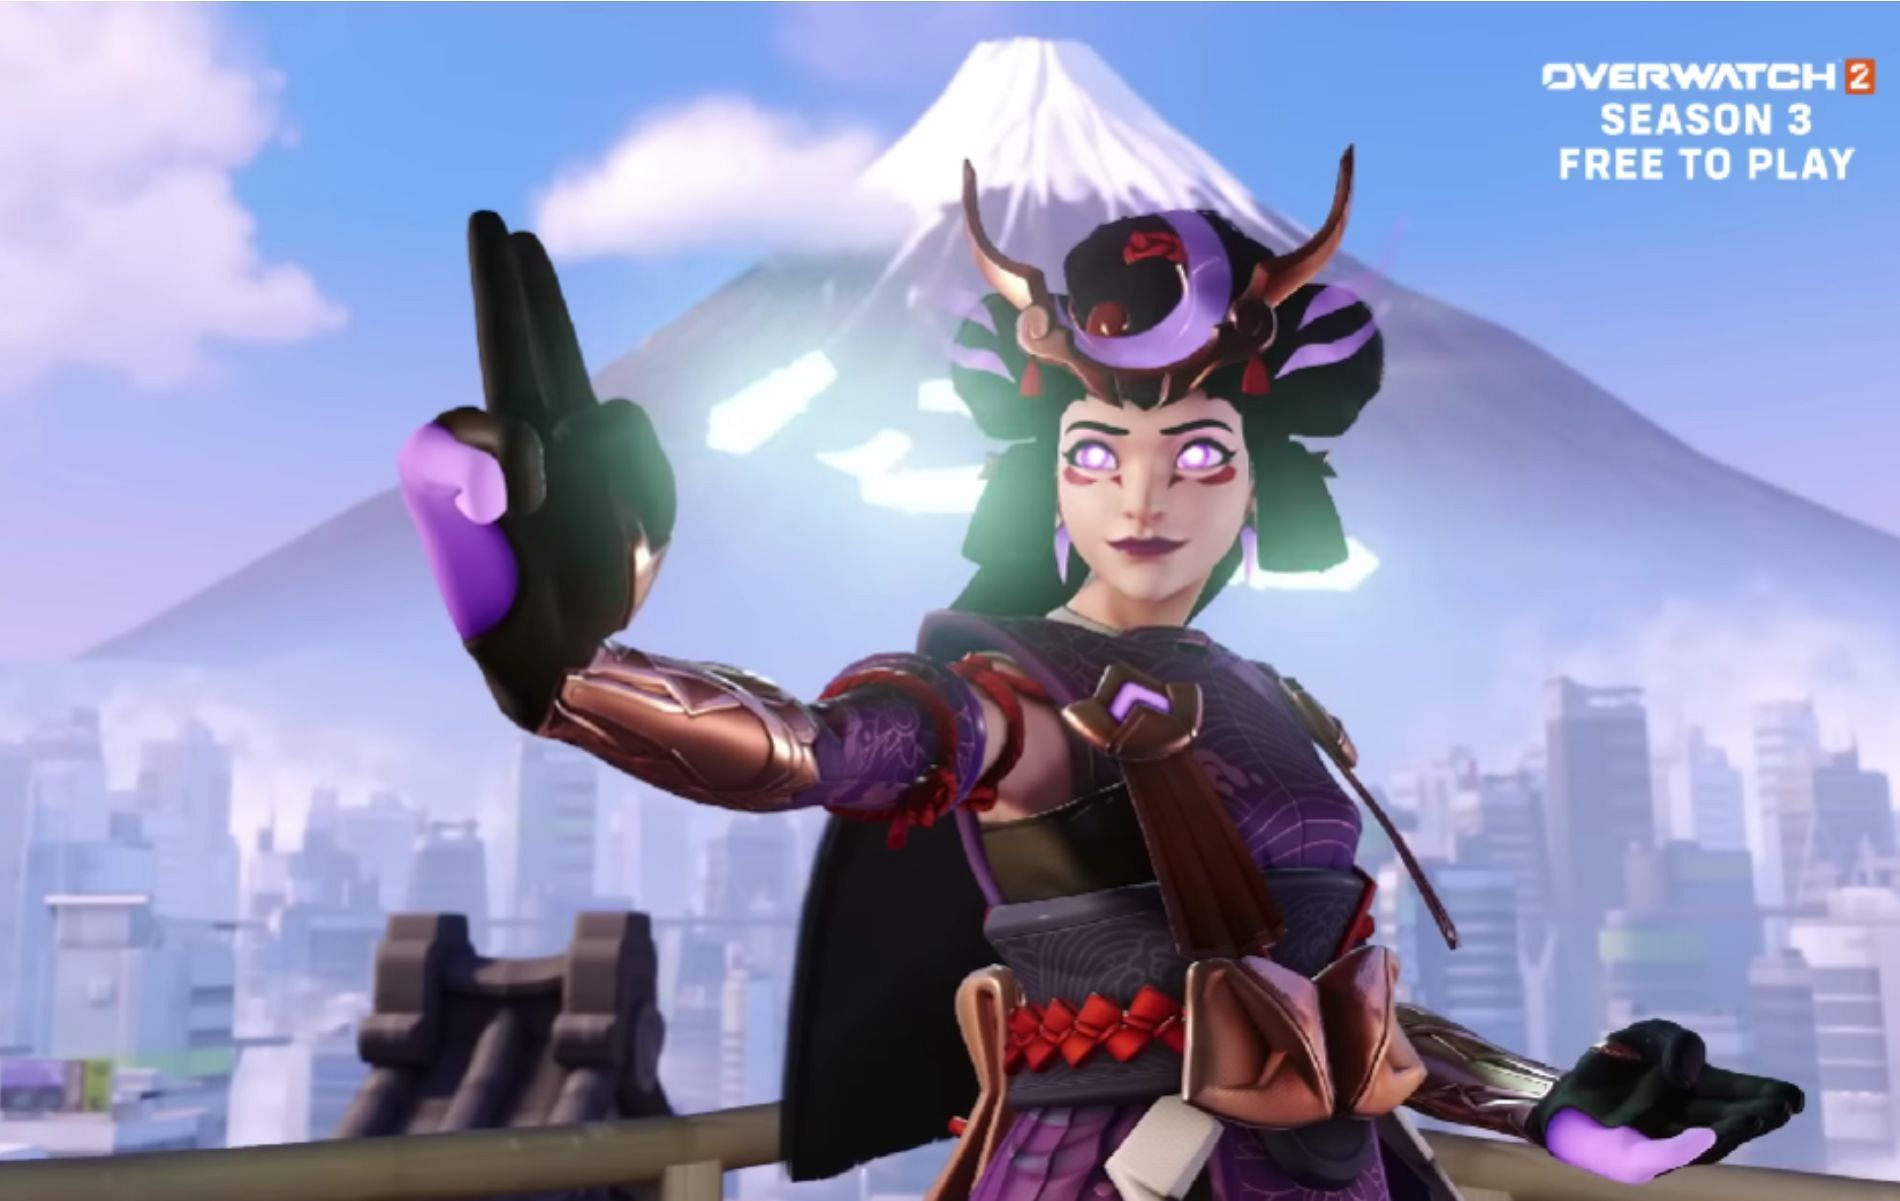 The Amaterasu Kiriko skin is expected to be a Tier 80 Season 3 Battle Pass reward in Overwatch 2 (Image via Blizzard)